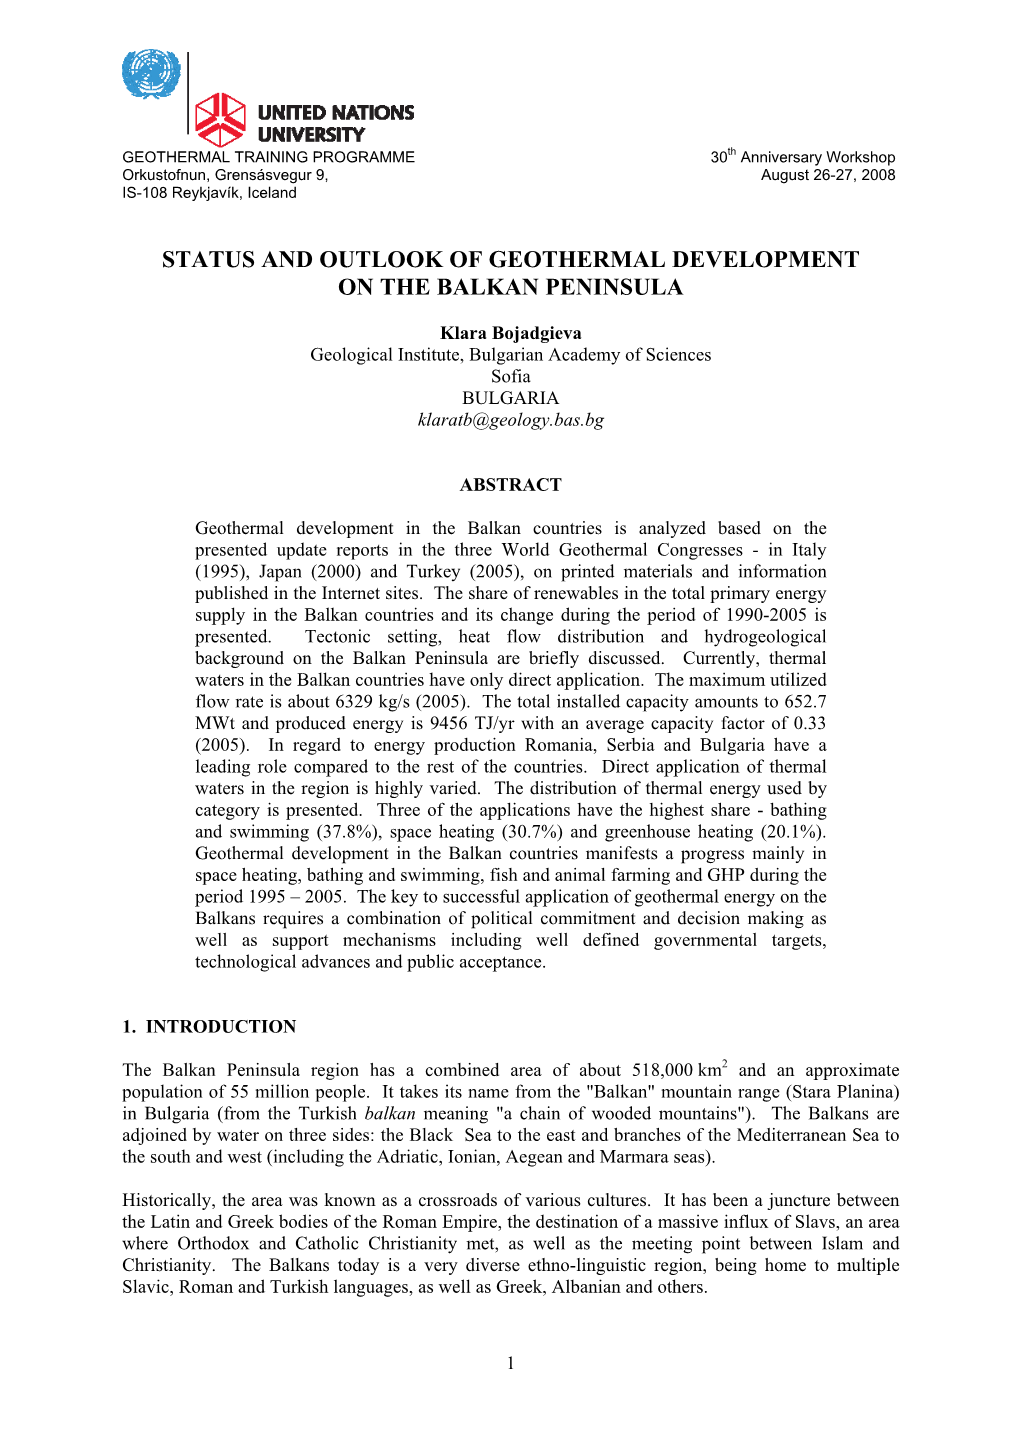 Status and Outlook of Geothermal Development on the Balkan Peninsula